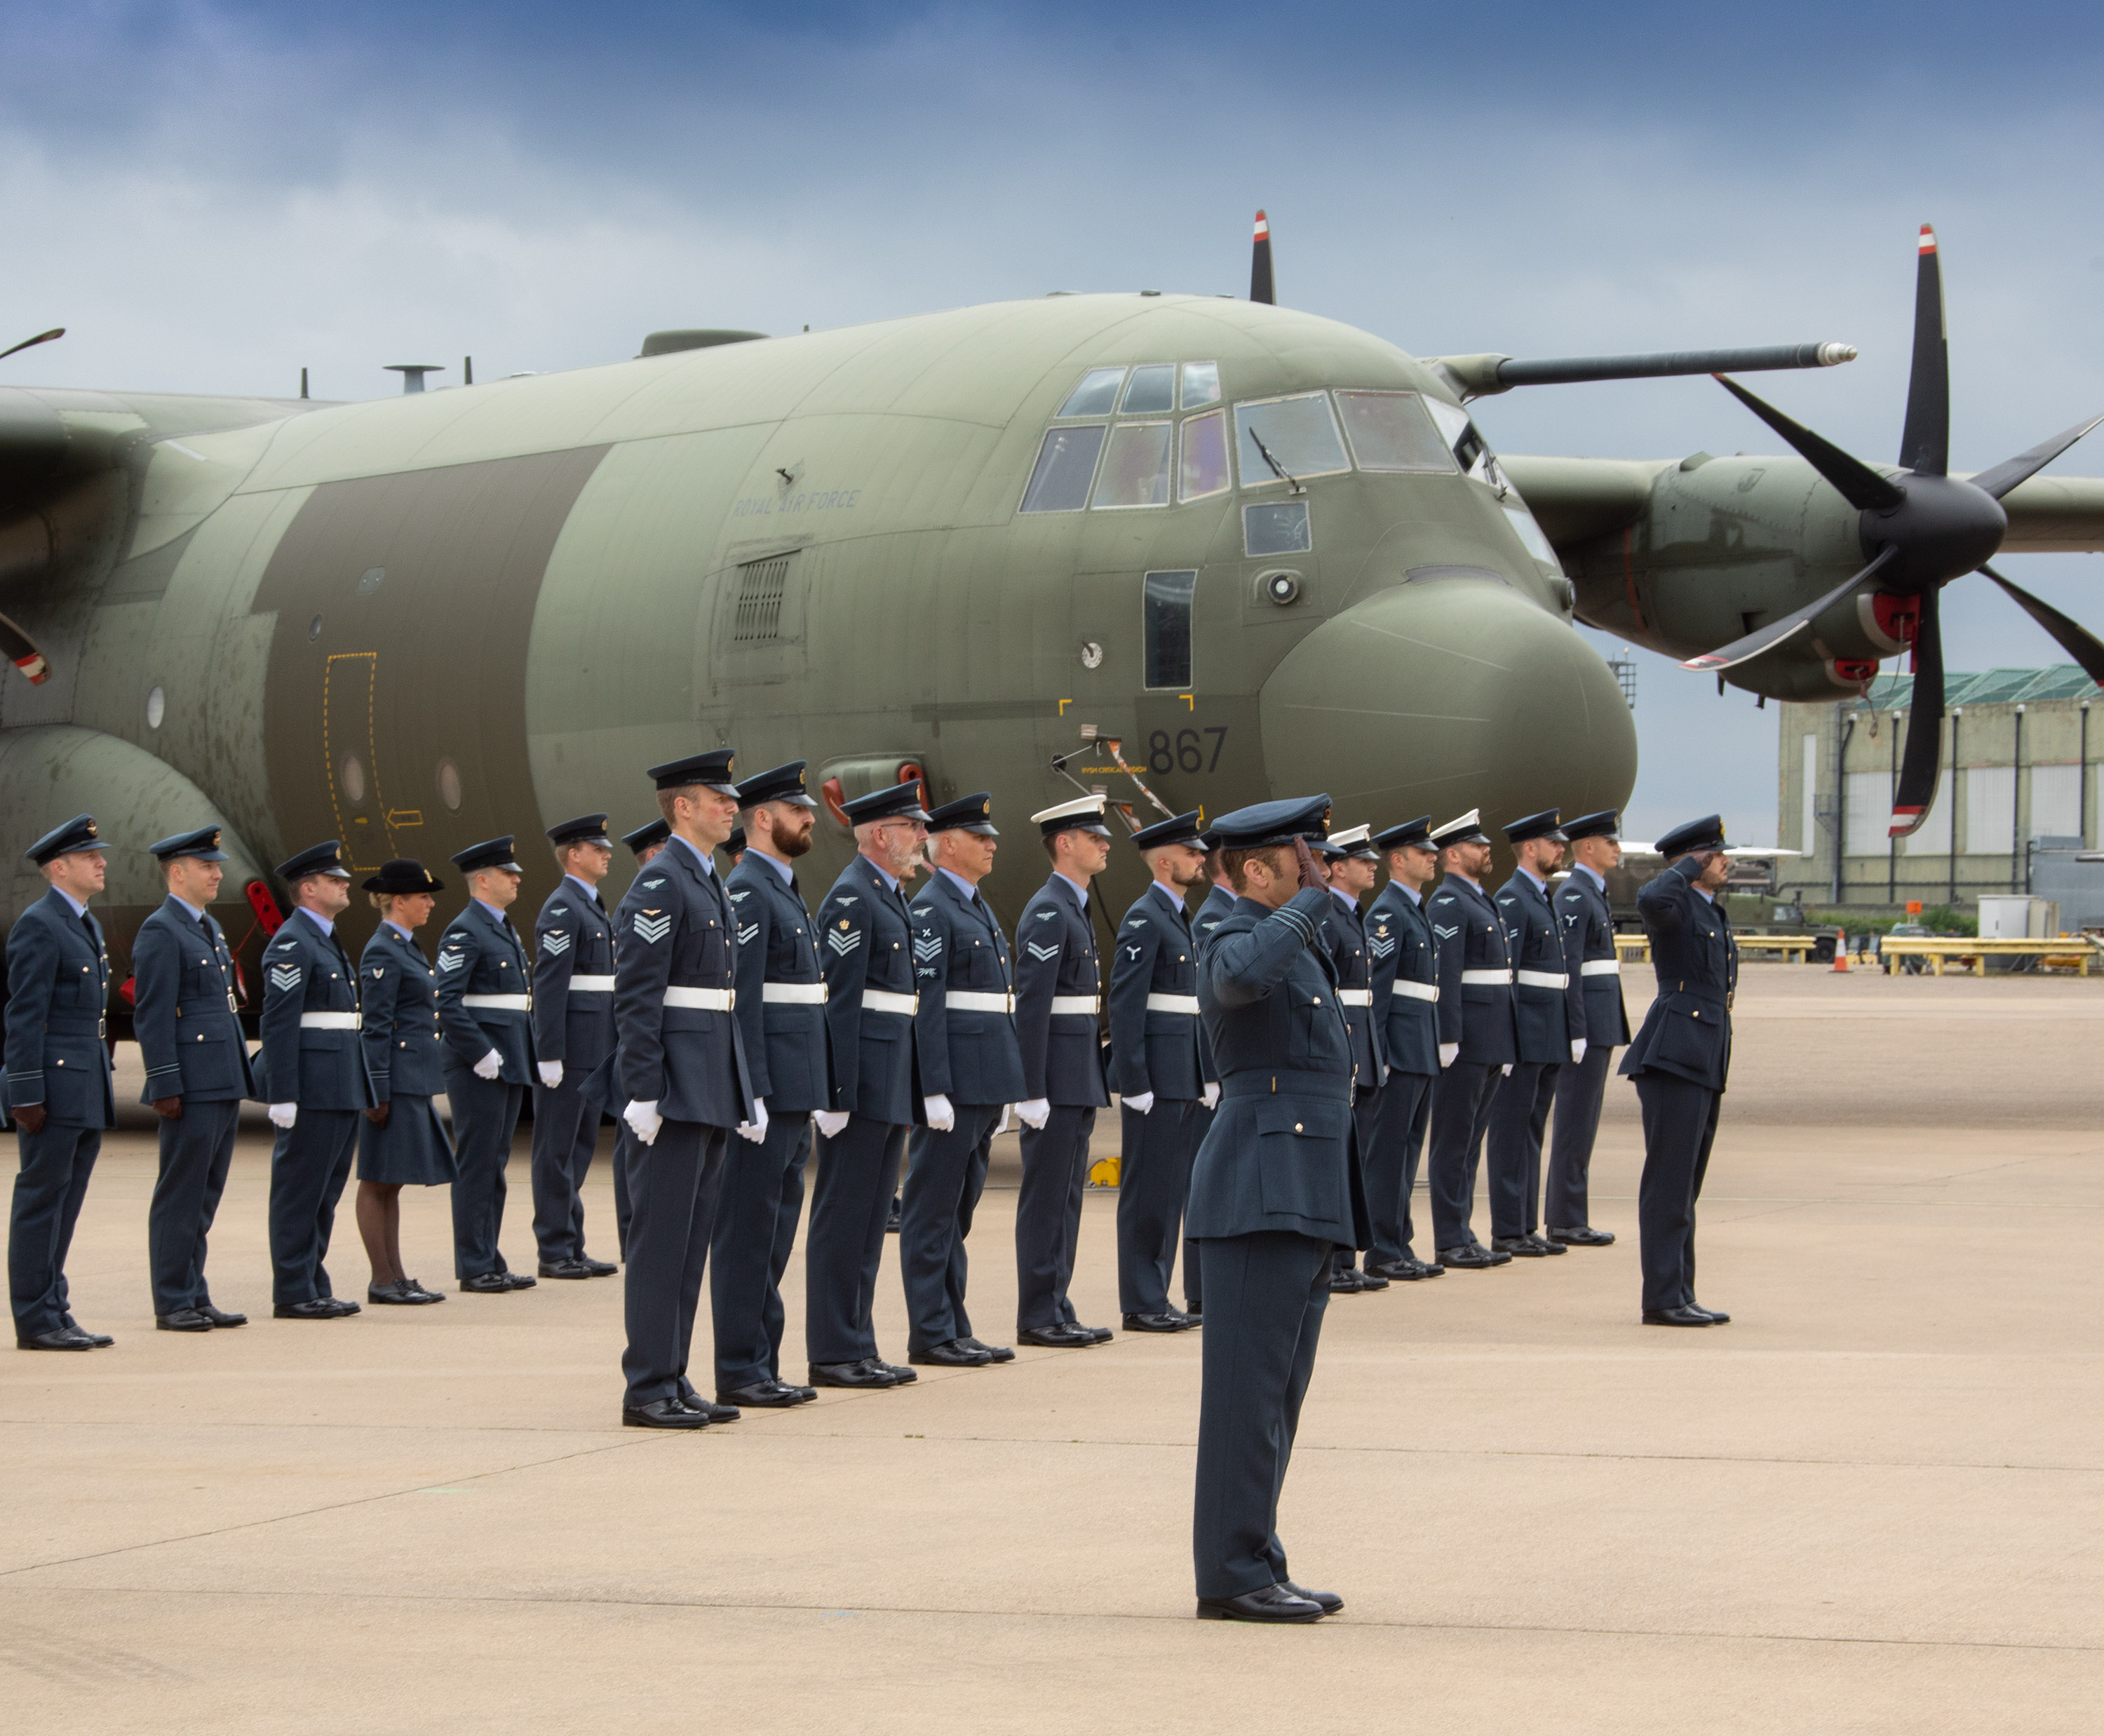 RAF Aviators stand and salute by Atlas aircraft.